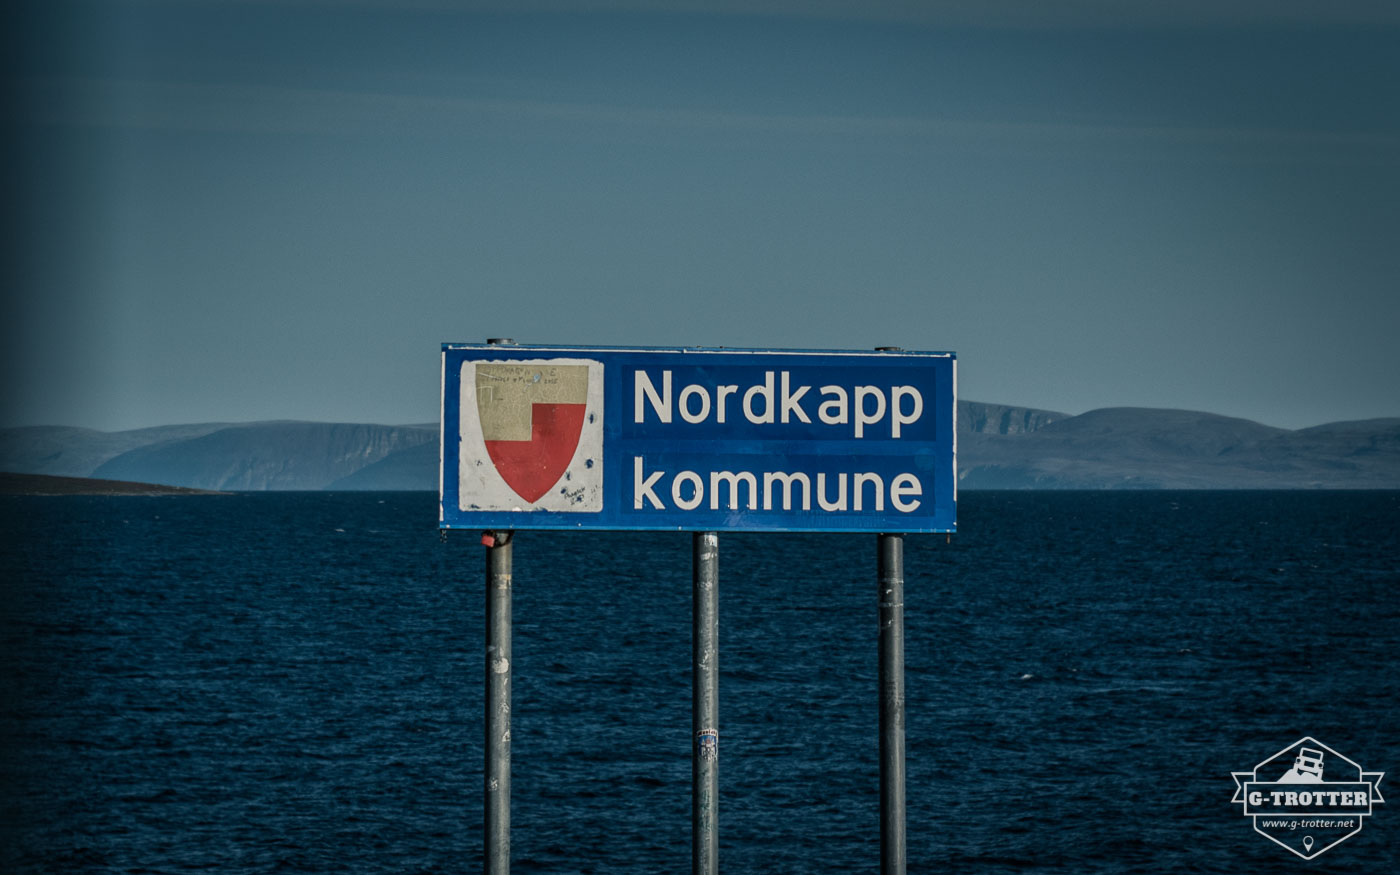 The North Cape is waiting.